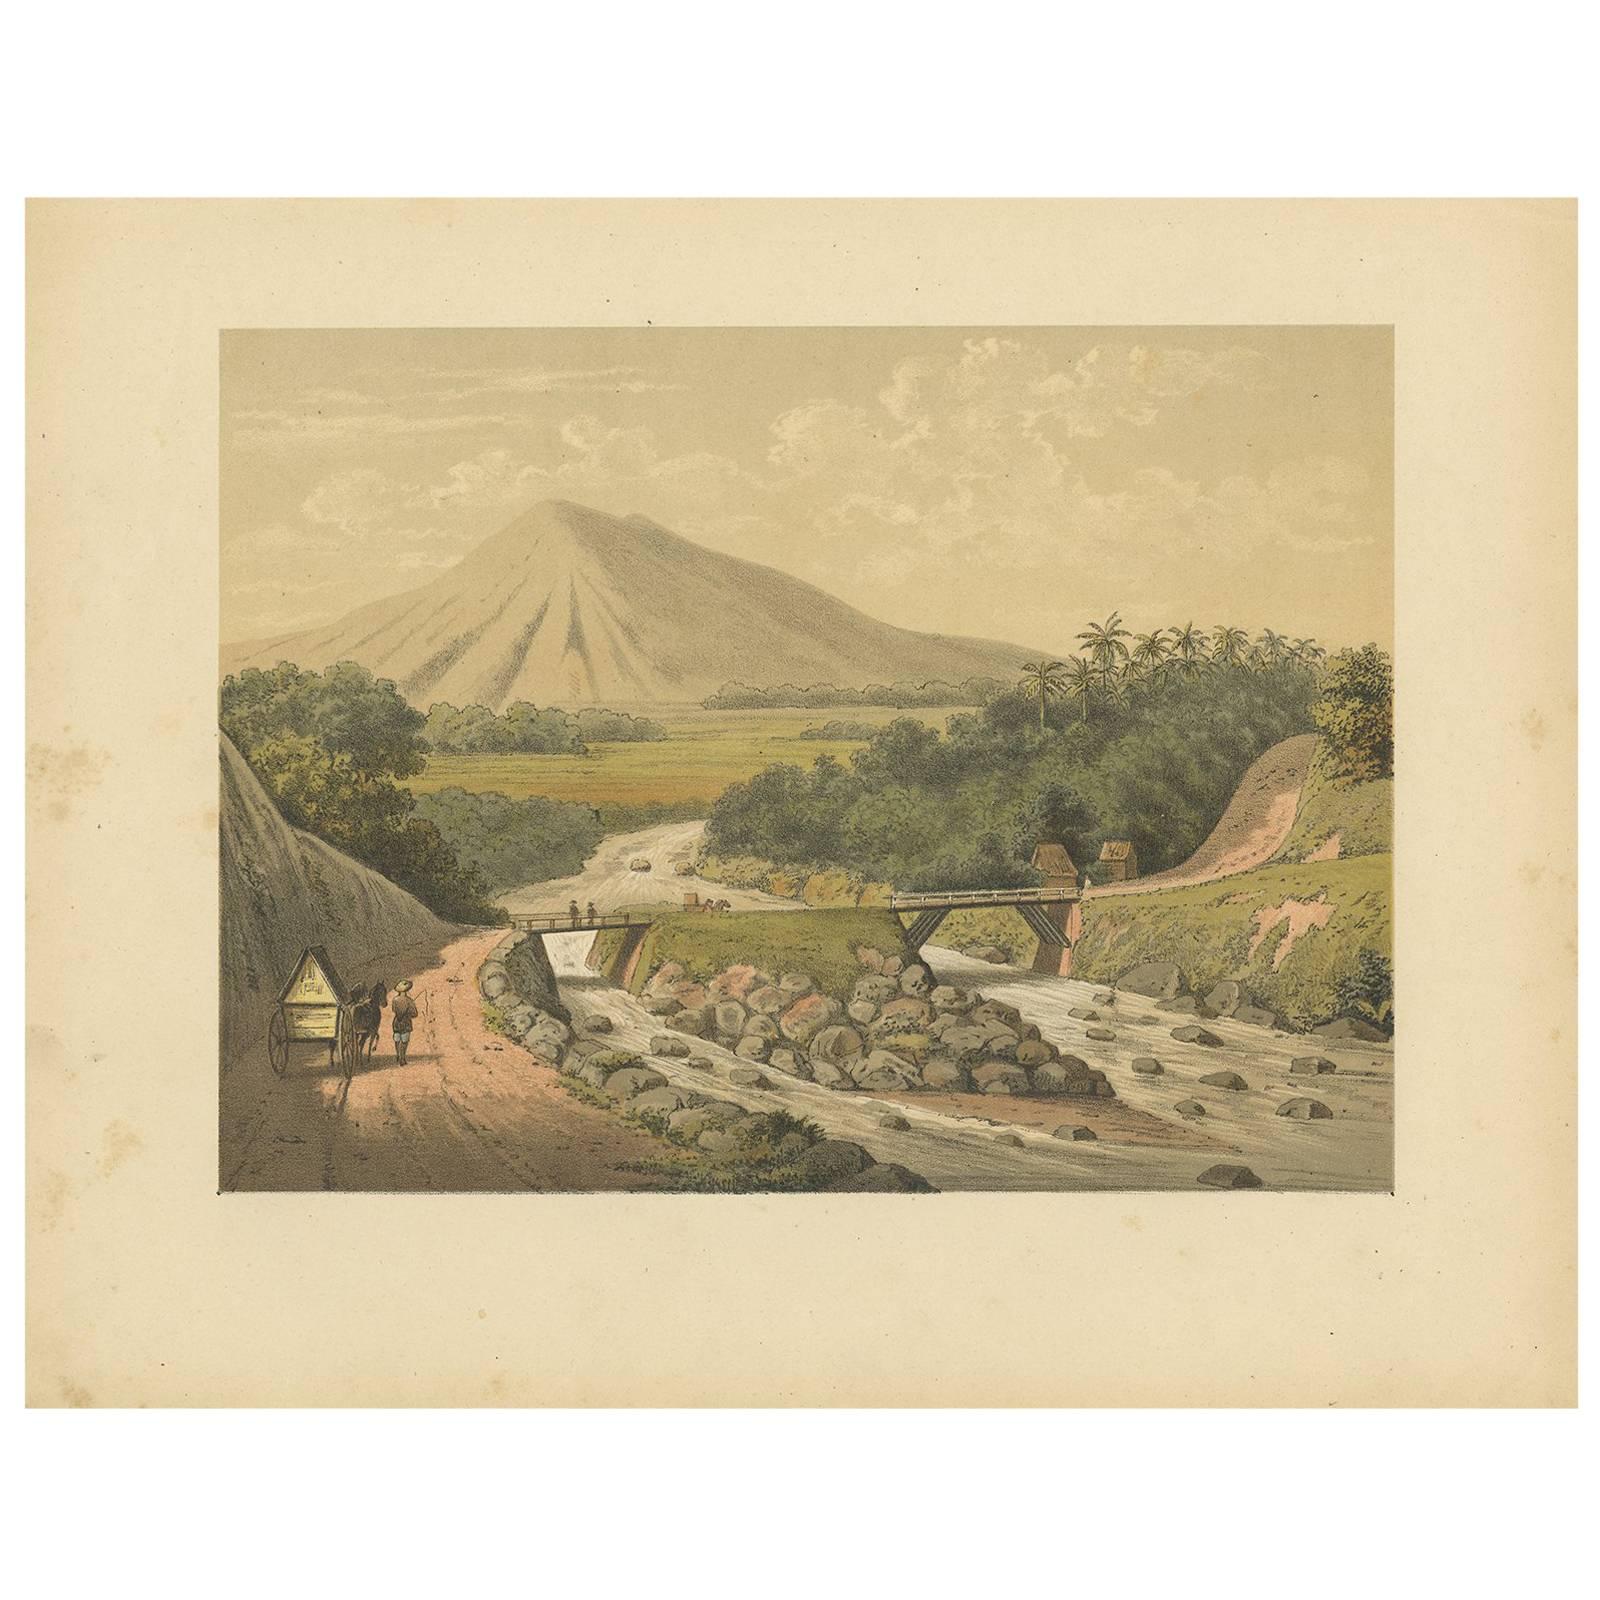 Antique Print of the Ciliwung River on Java by M.T.H. Perelaer, 1888